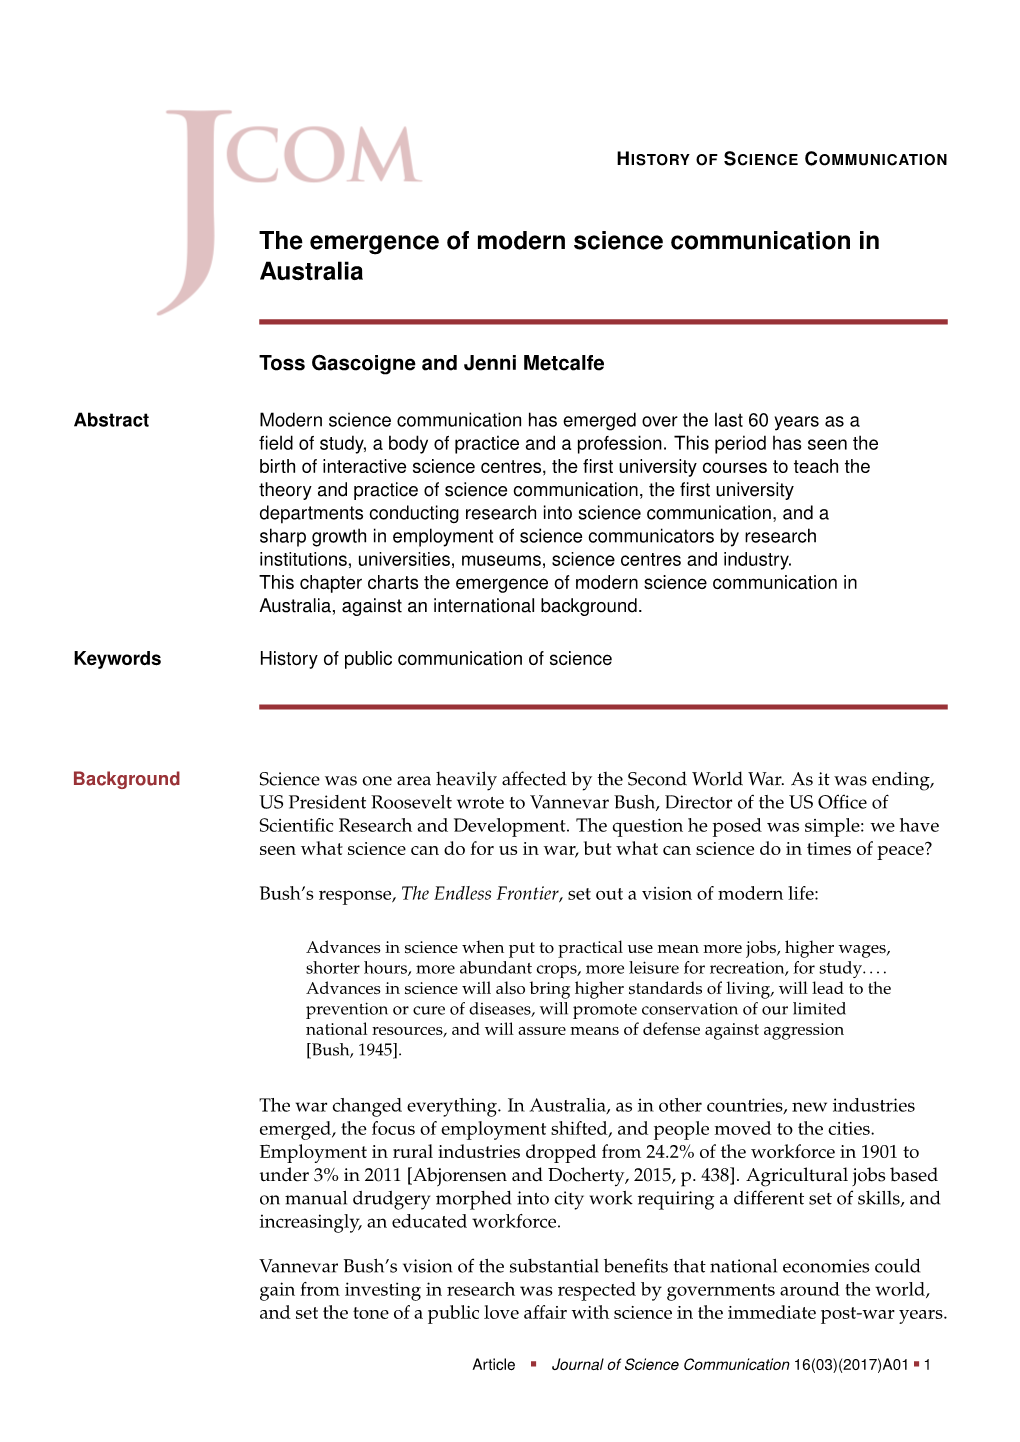 The Emergence of Modern Science Communication in Australia